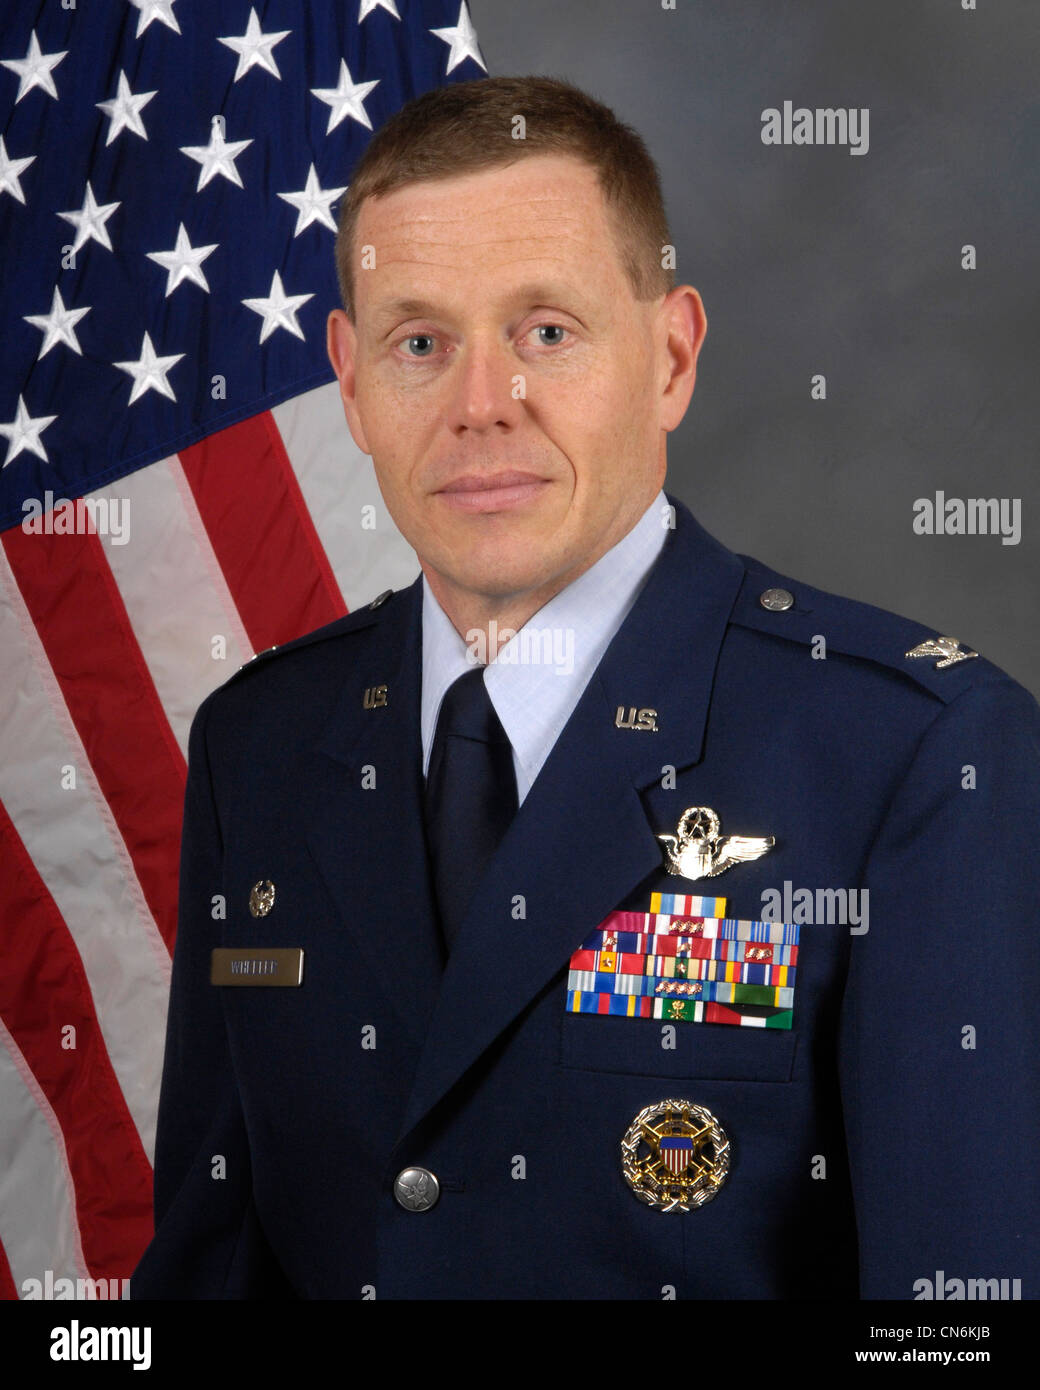 United States Air Force Colonel Robert Wheeler, commander of the 2nd Bomb Wing at Barksdale Air Force Base at the time of the 2007 United States Air Force nuclear weapons incident [ Stock Photo